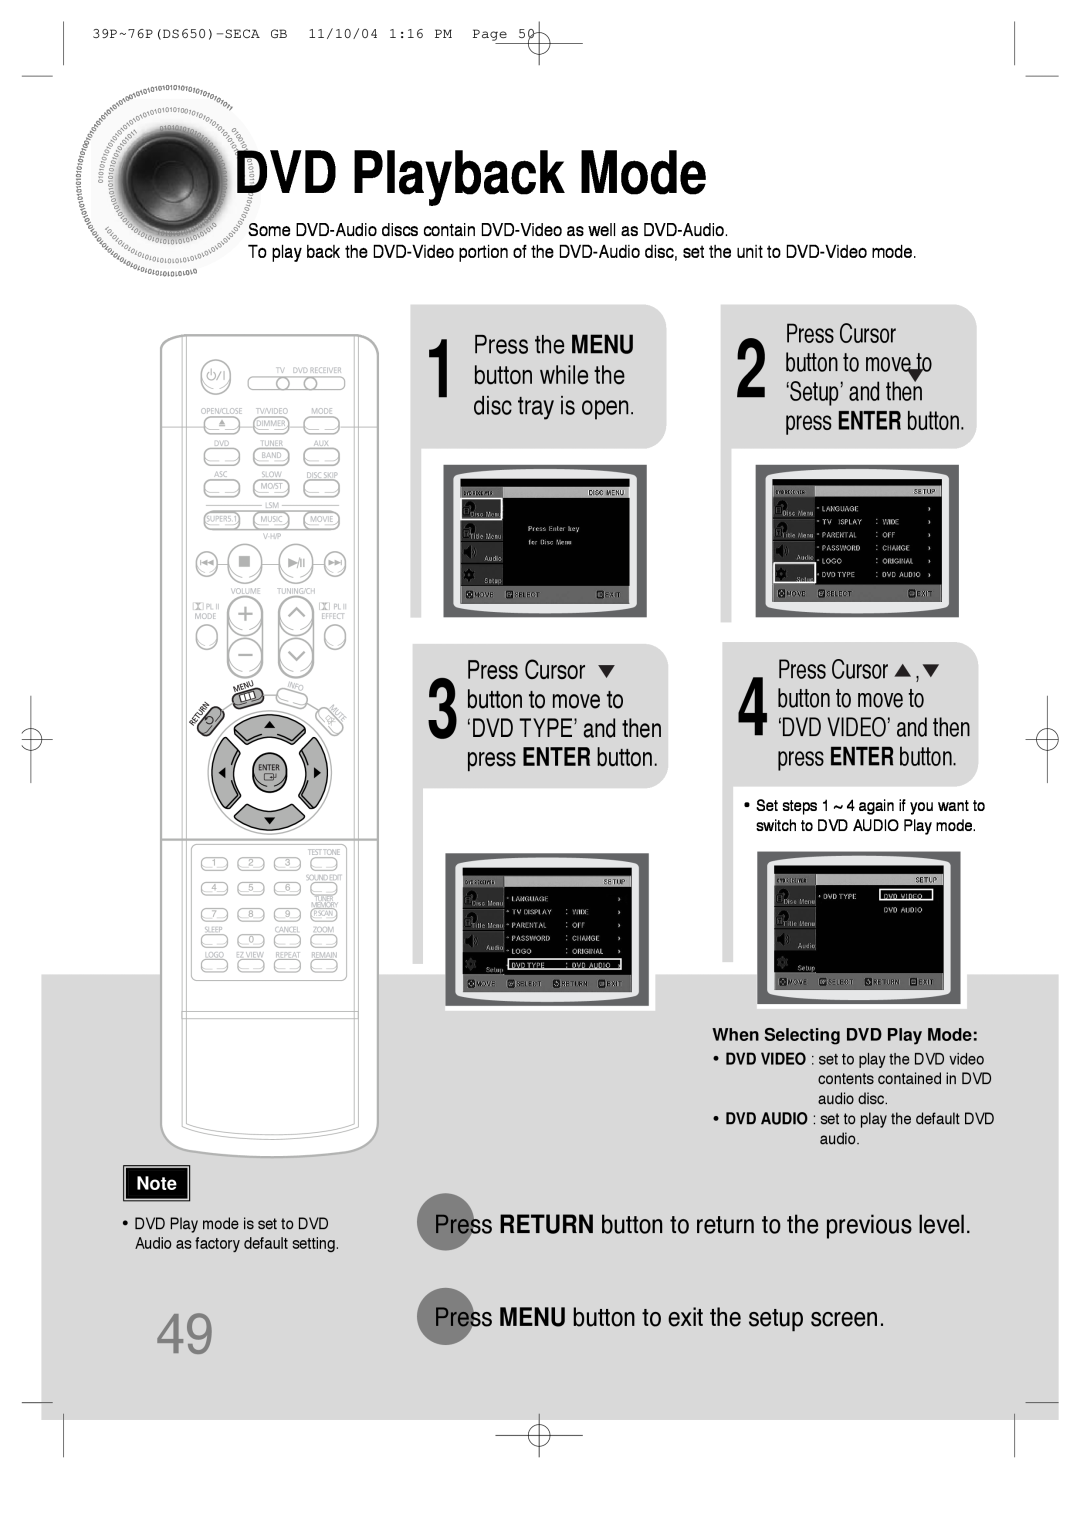 Samsung HT-DS650 instruction manual DVDPlayback Mode, Press the MENU, Press Cursor, button while the disc tray is open 